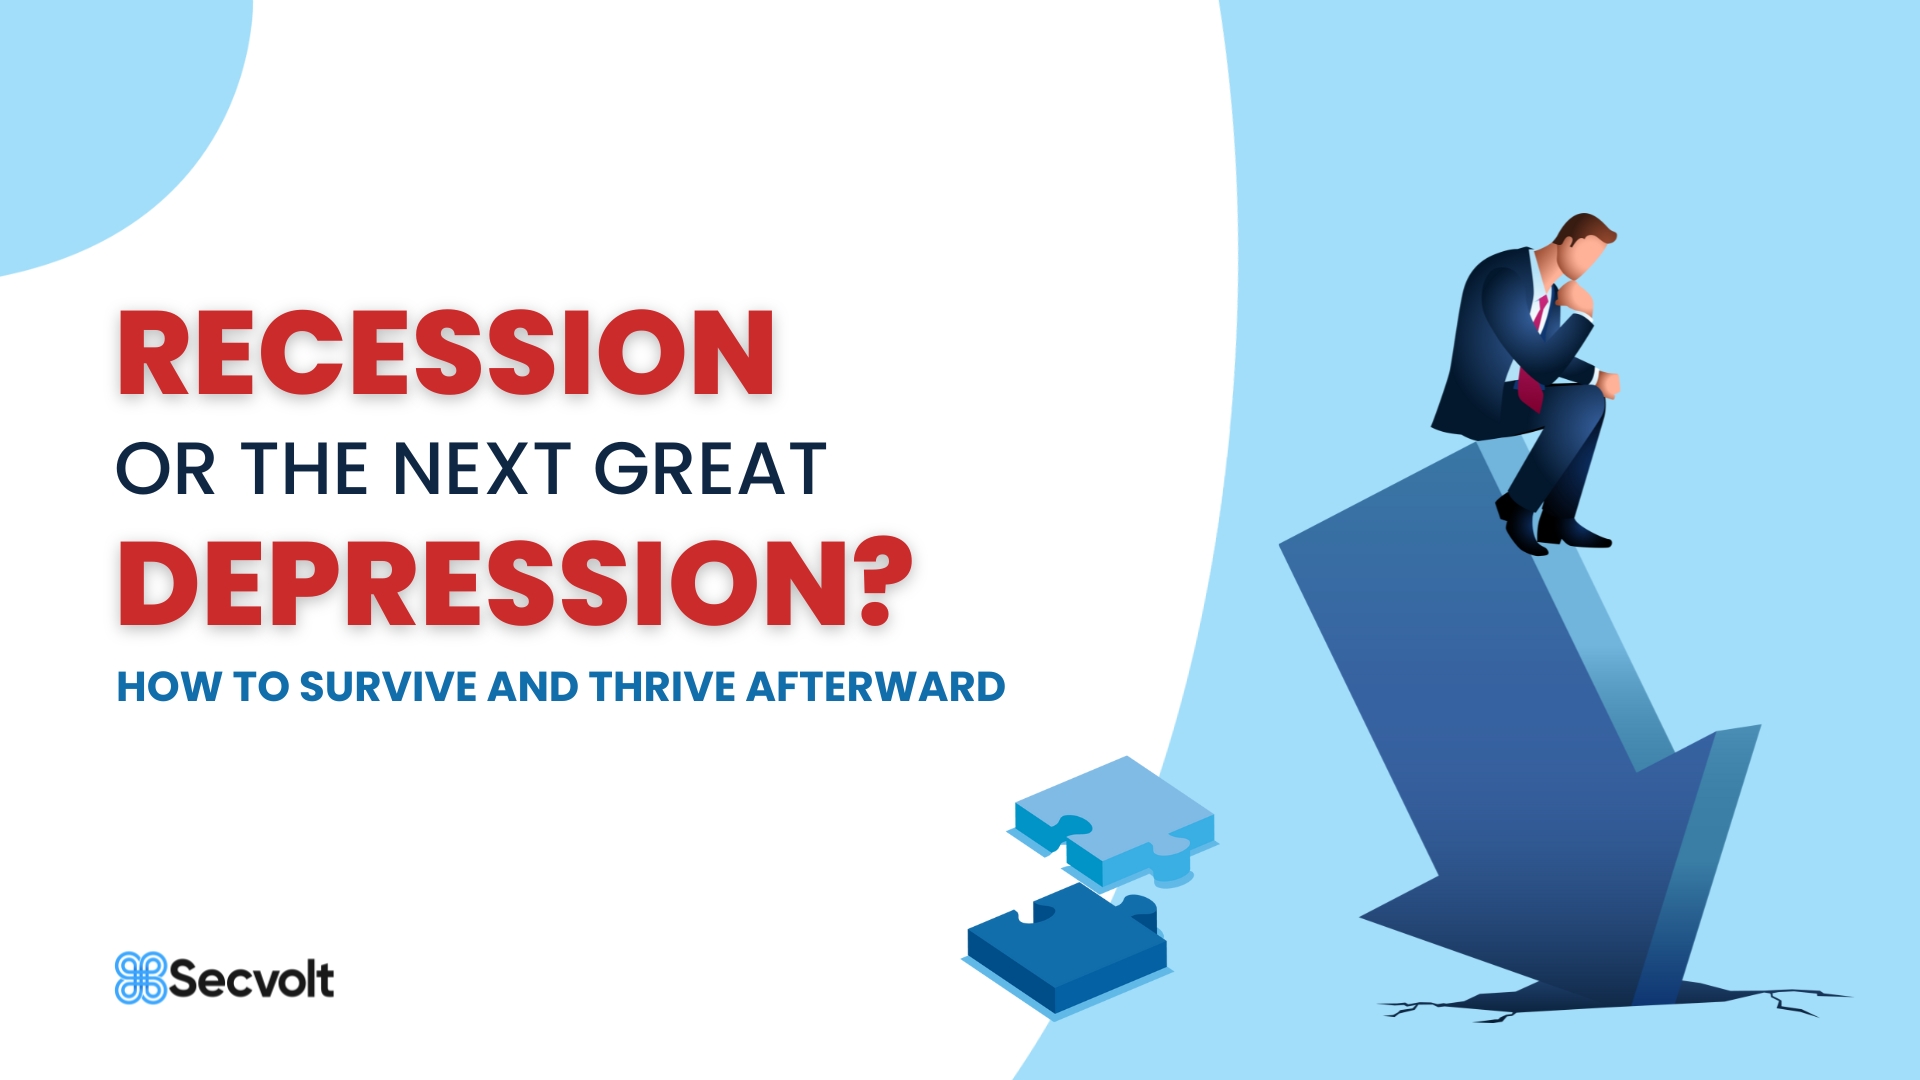 Recession Or The Next Great Depression? How To Survive And Thrive Afterward